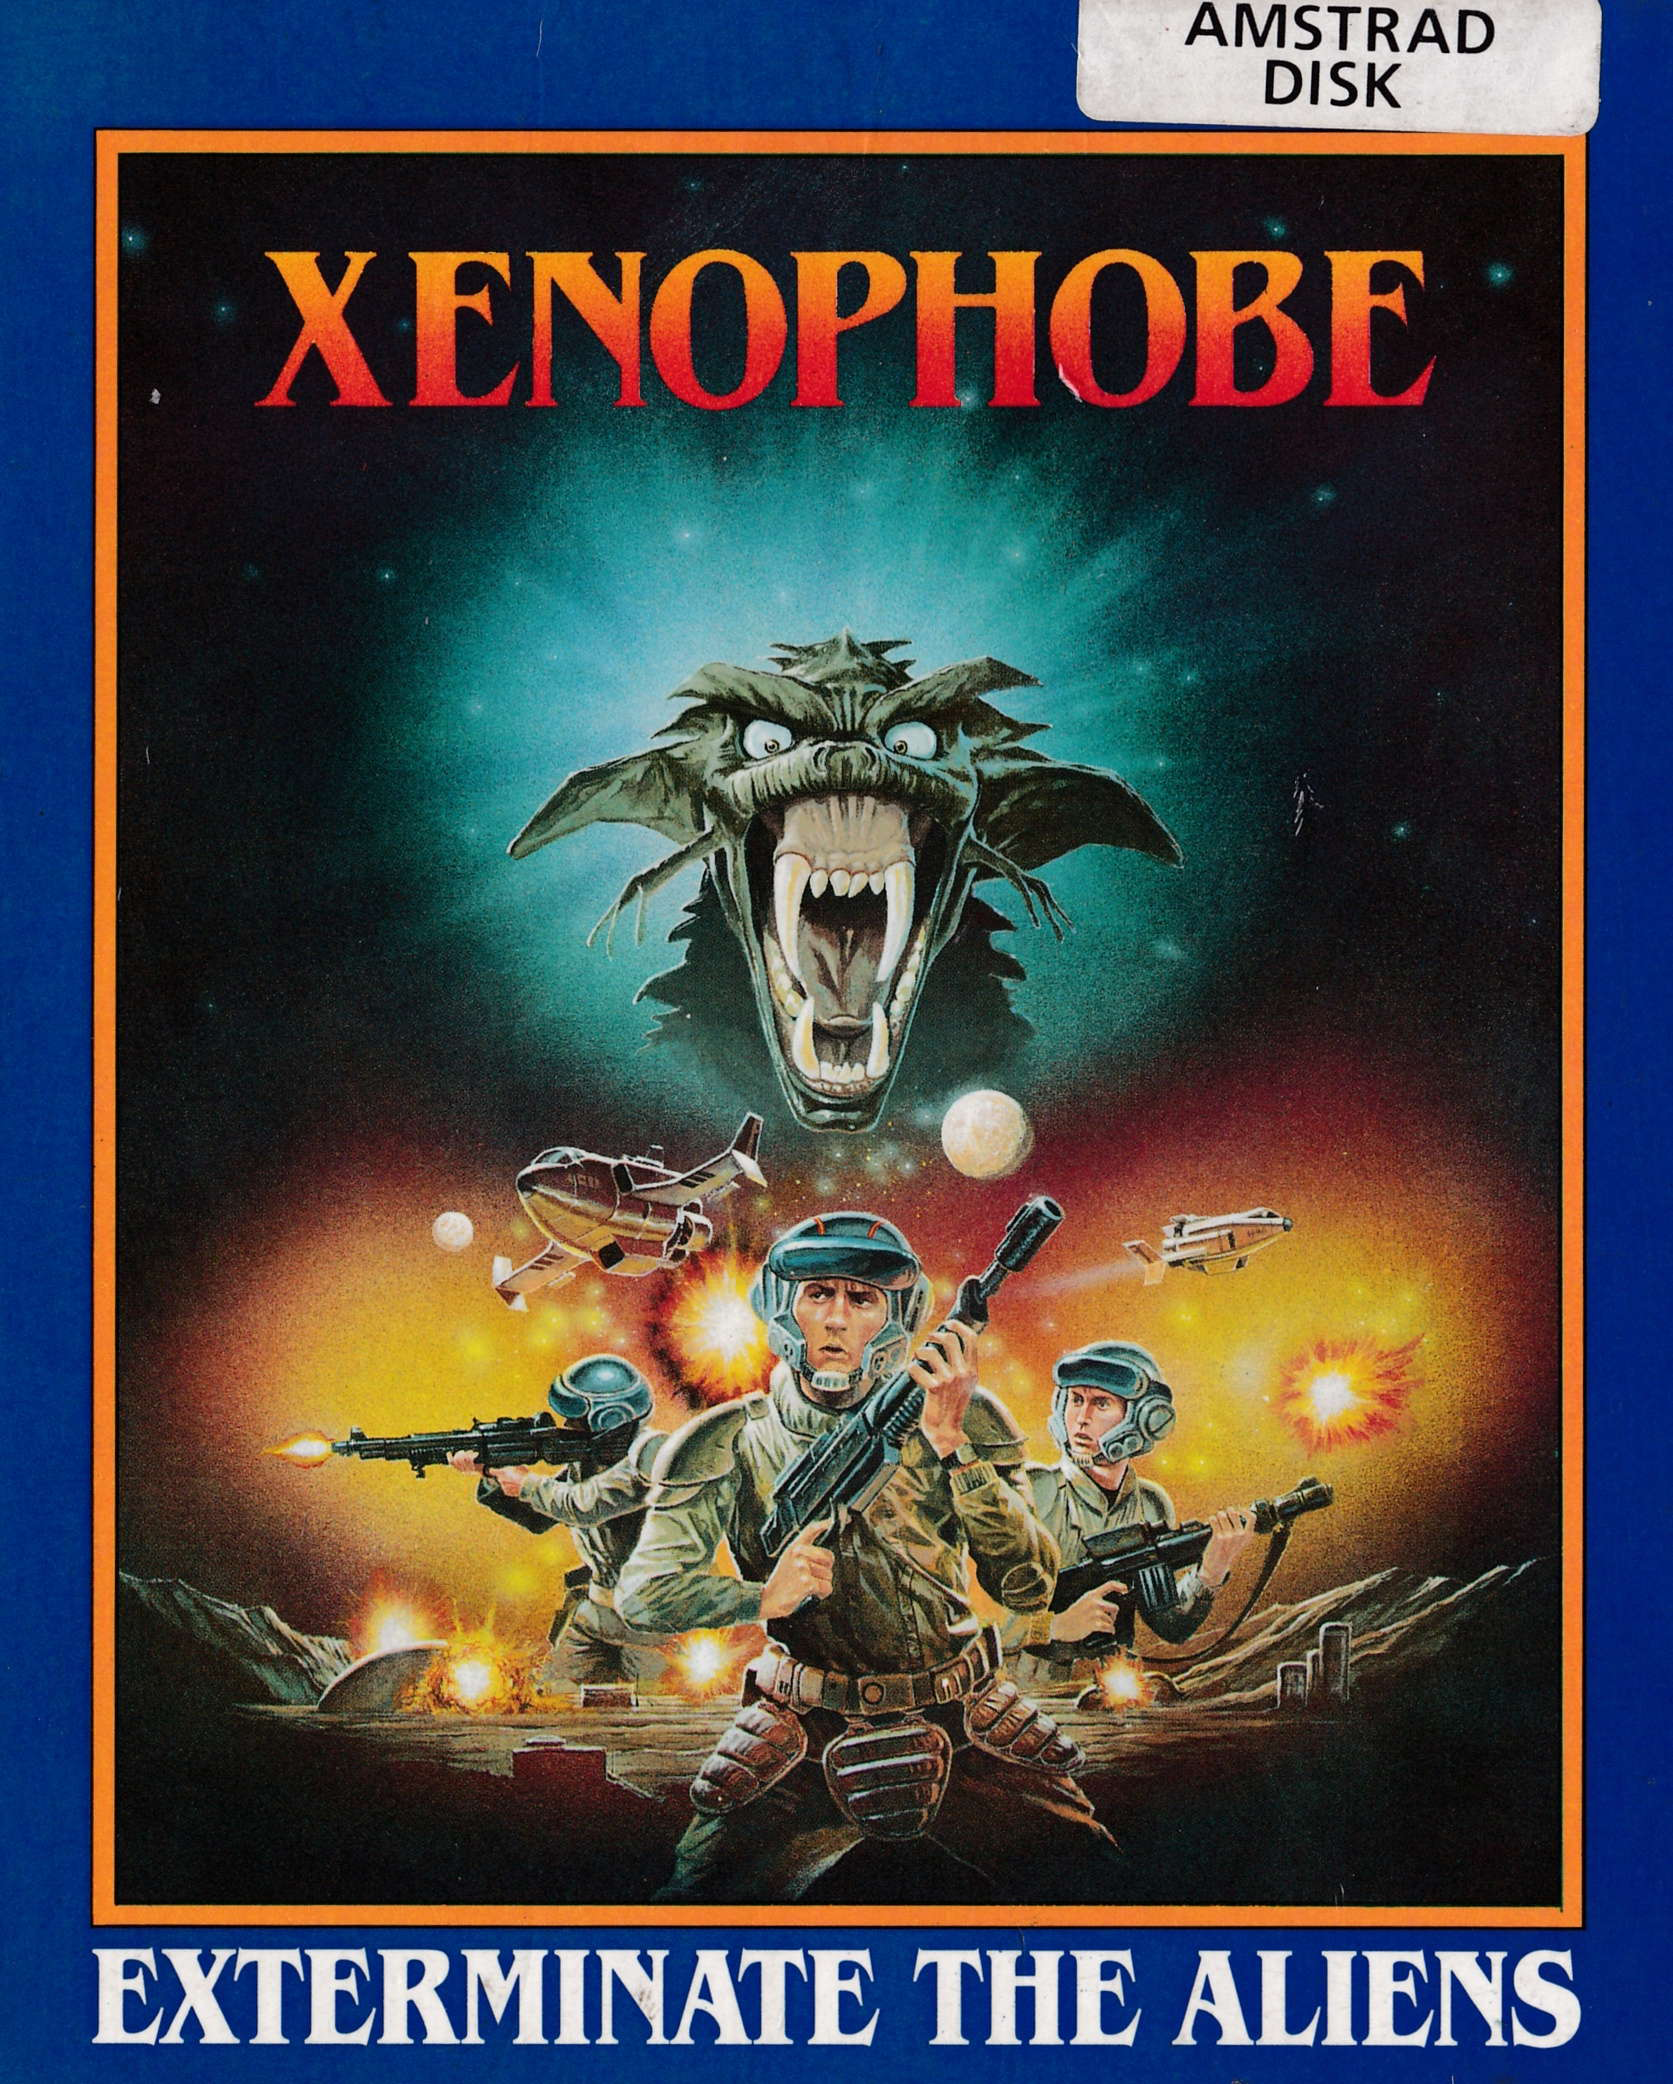 cover of the Amstrad CPC game Xenophobe  by GameBase CPC